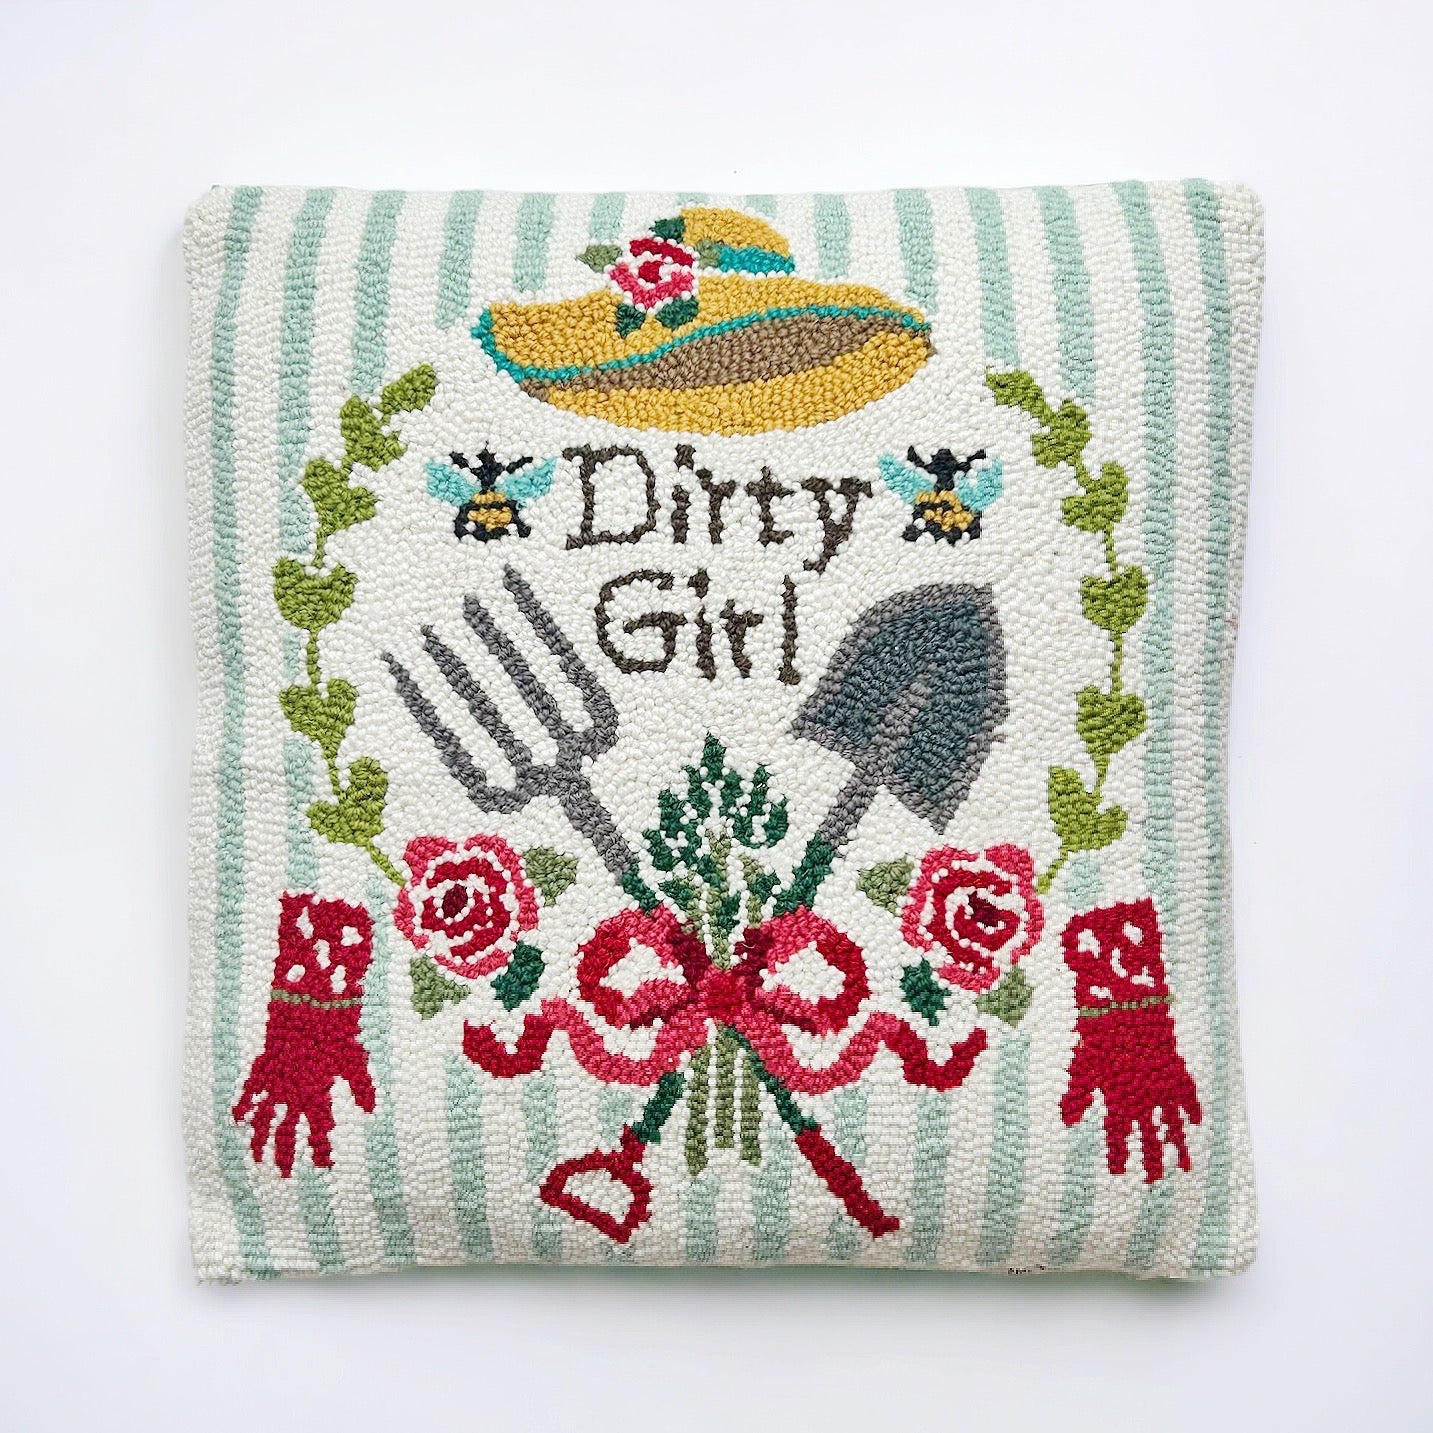 Hooked Dirty Girl Pillow